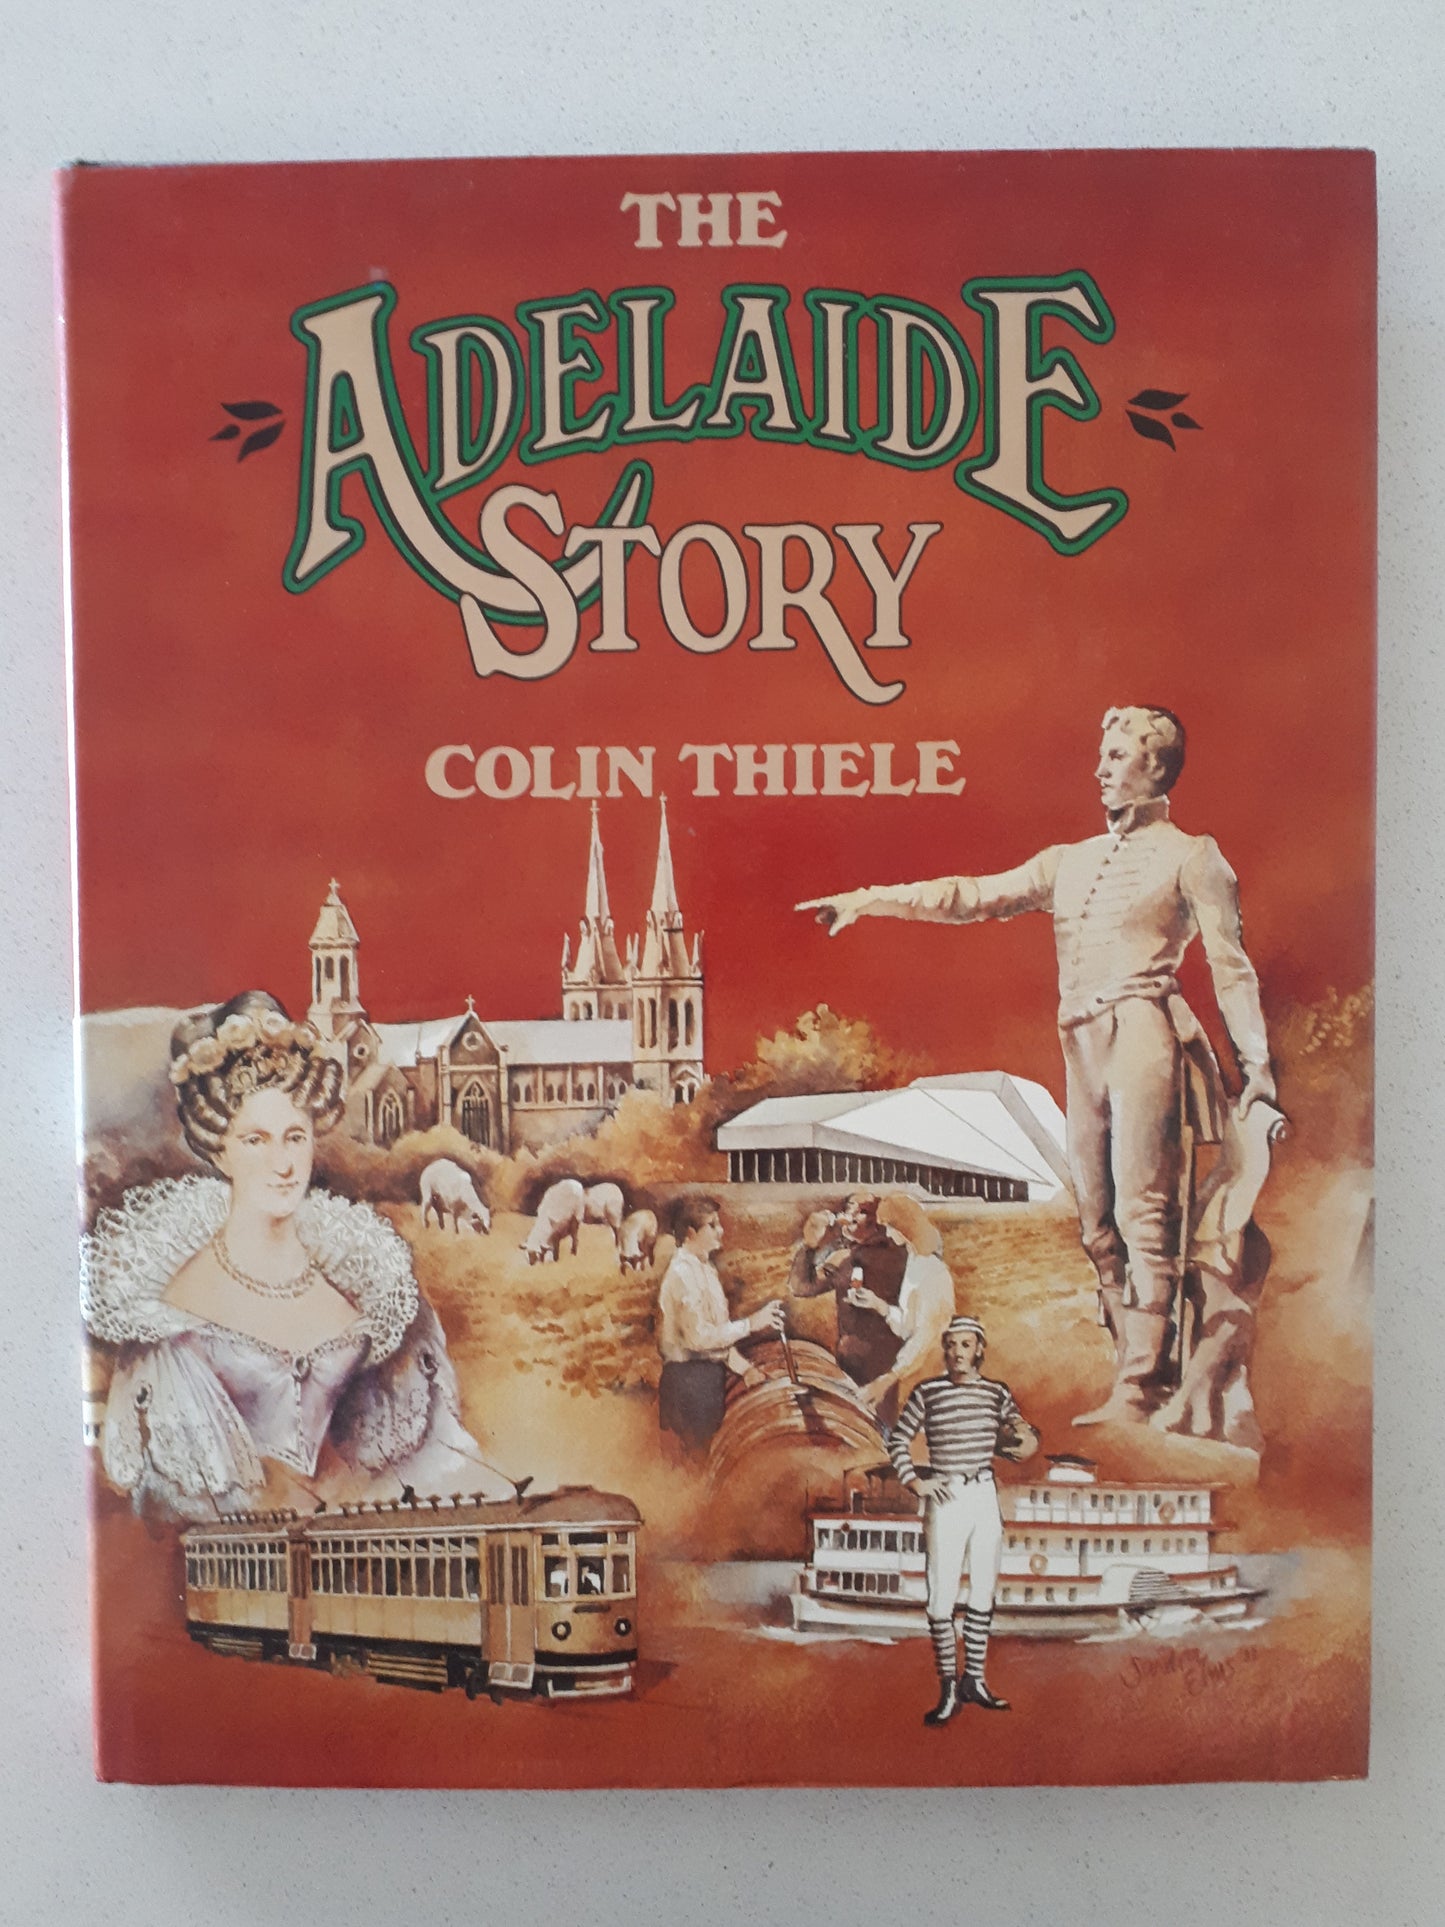 The Adelaide Story by Colin Thiele